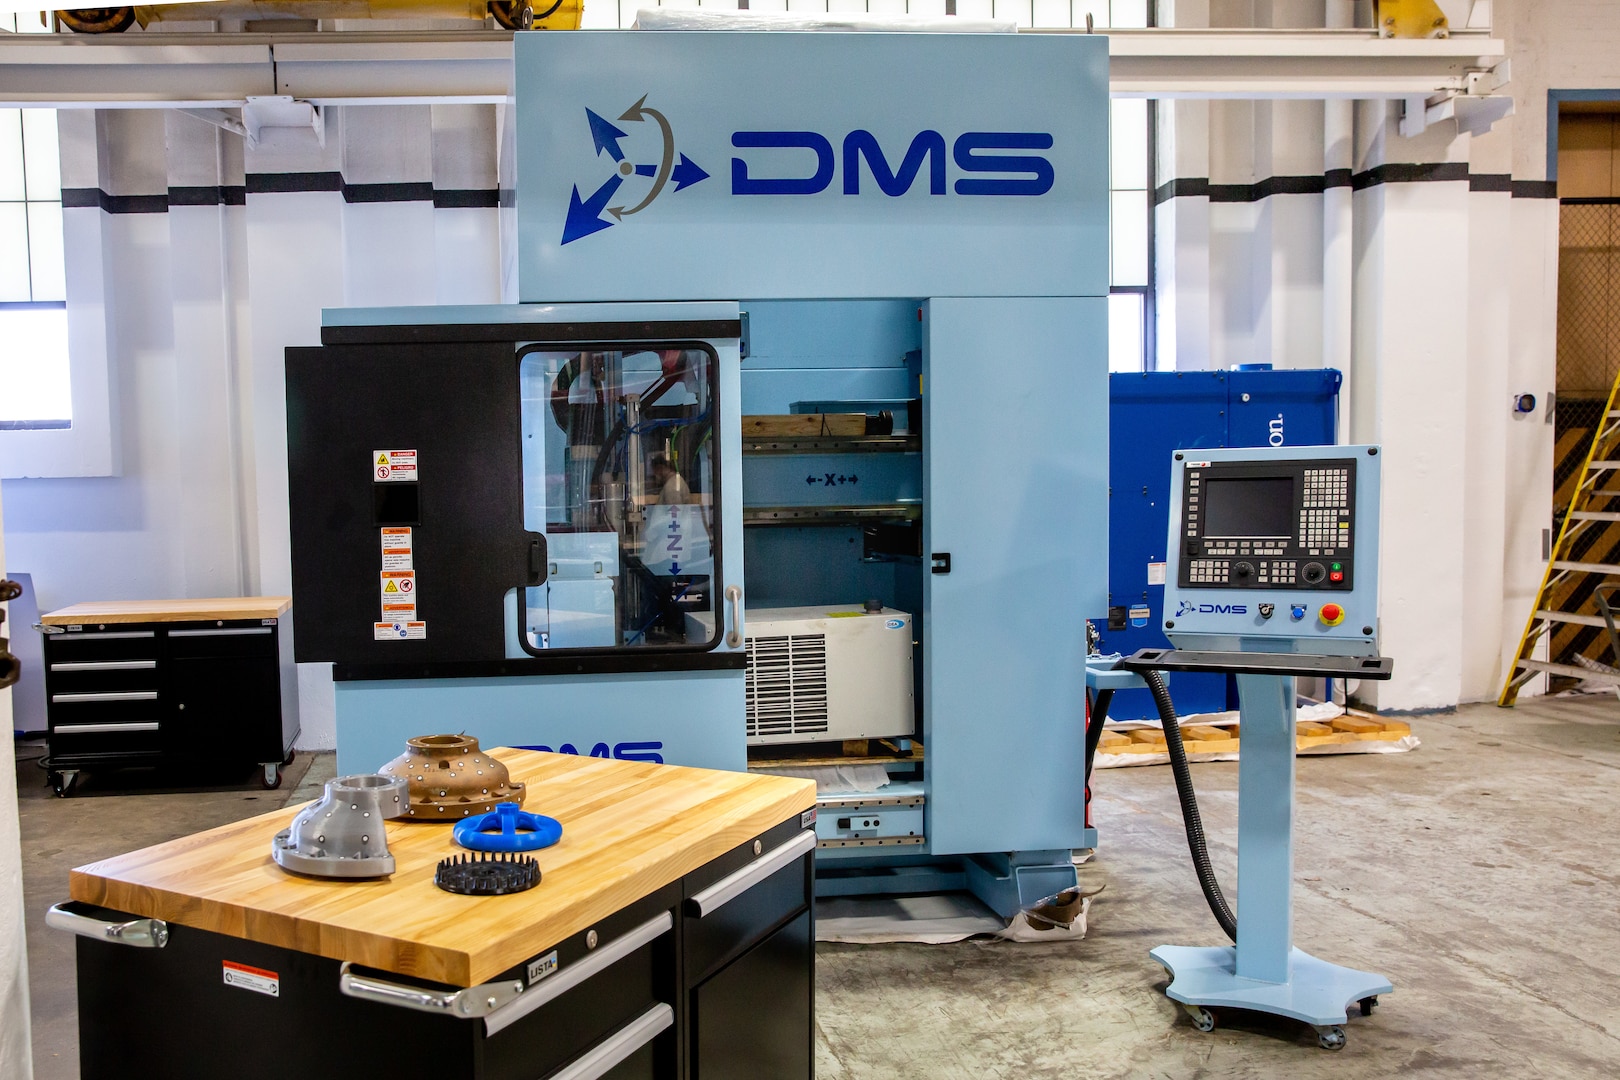 The Norfolk Naval Shipyard (NNSY) Additive Manufacturing (AM) Center of Excellence (CoE) houses 3-D metal printers that will be used to develop tools and parts in-house.